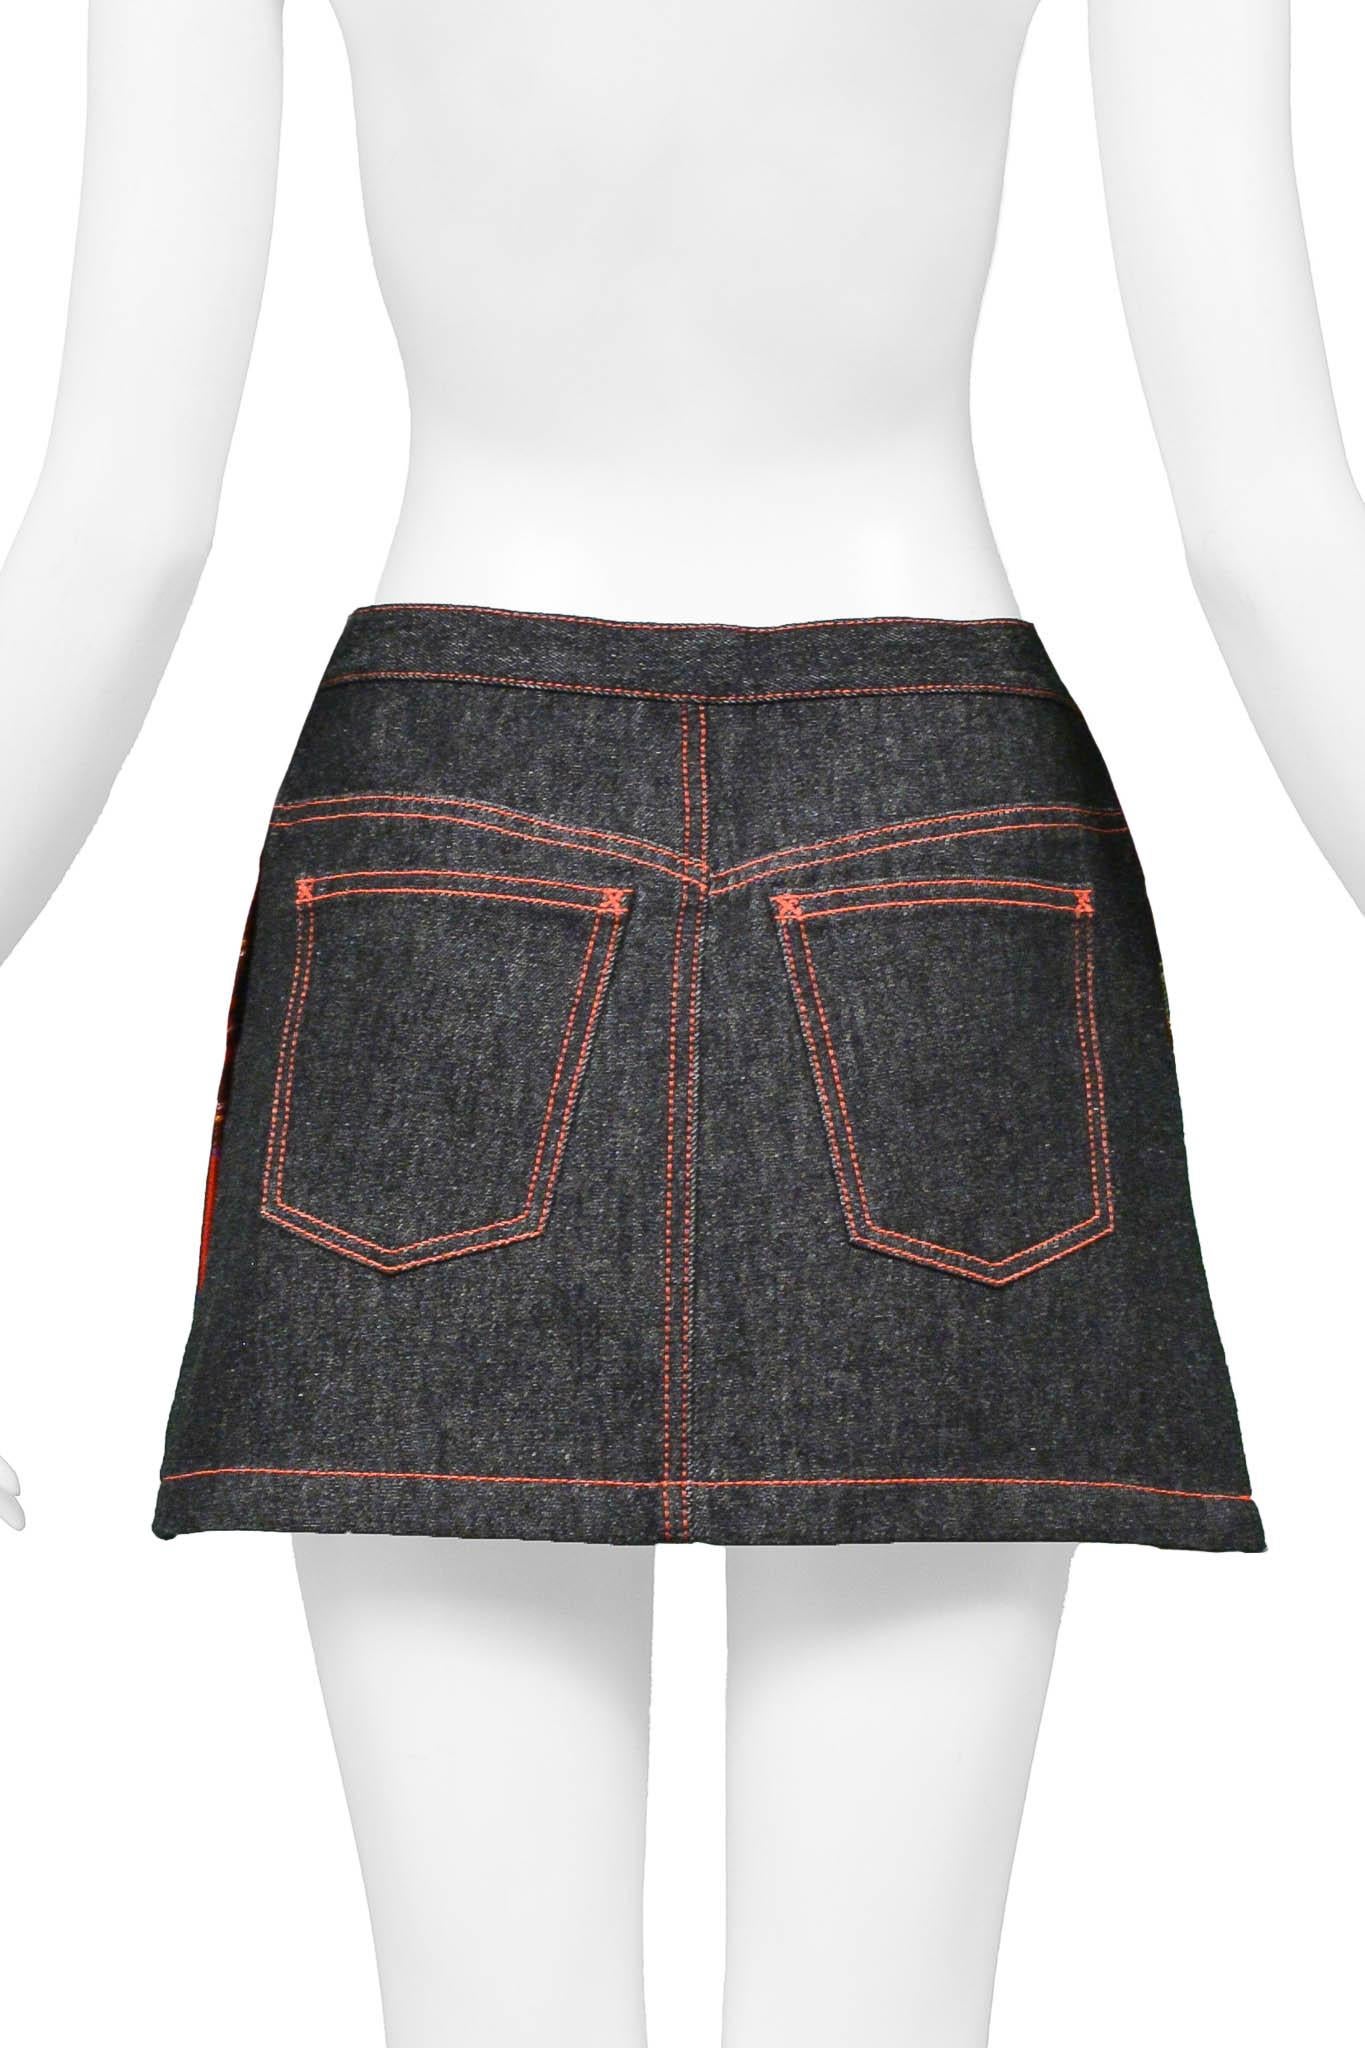 Women's Dolce & Gabbana Red Plaid & Patchwork Skirt 1999 For Sale